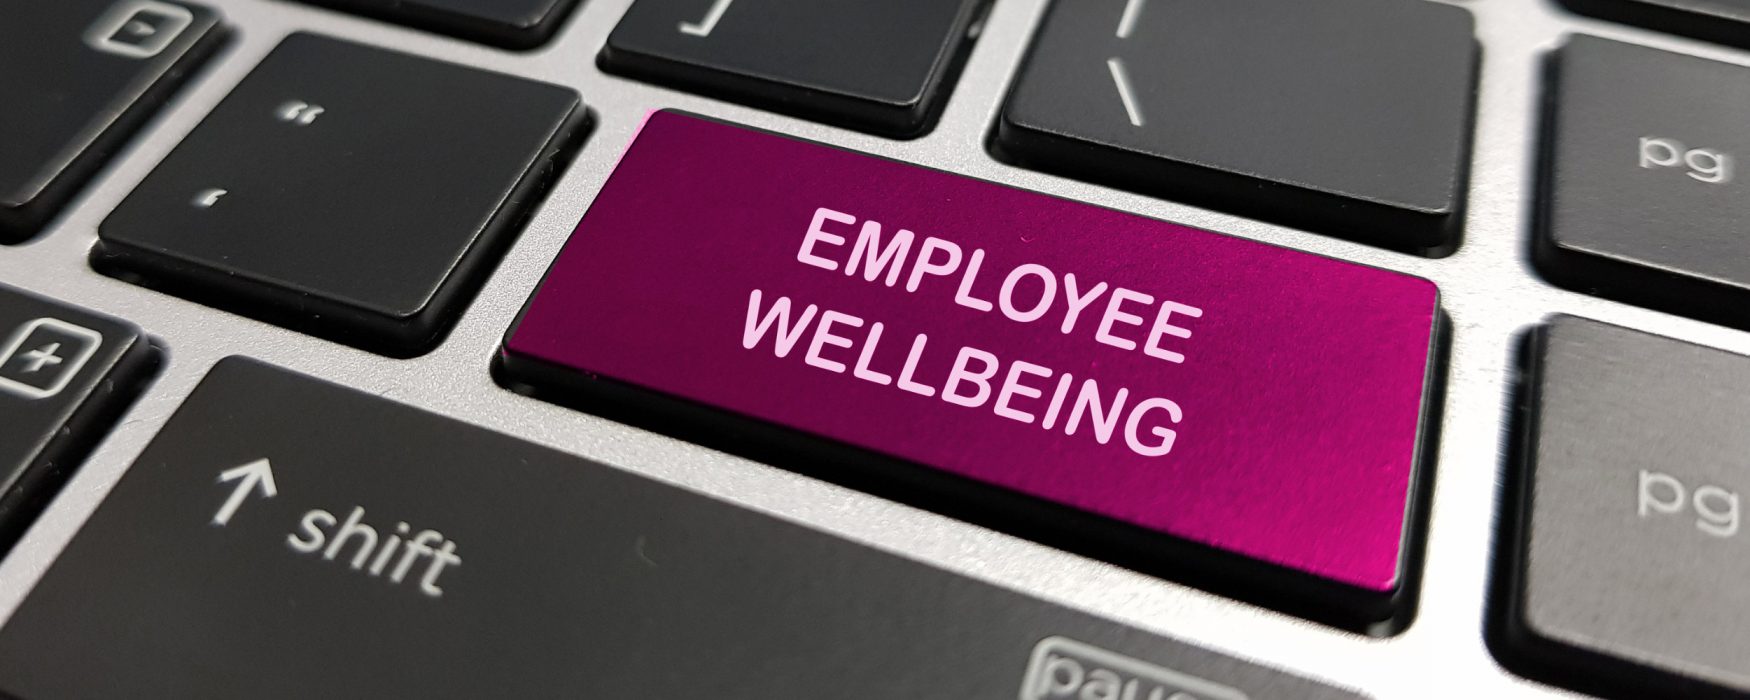 Image of a keyboard key that says employee wellbeing